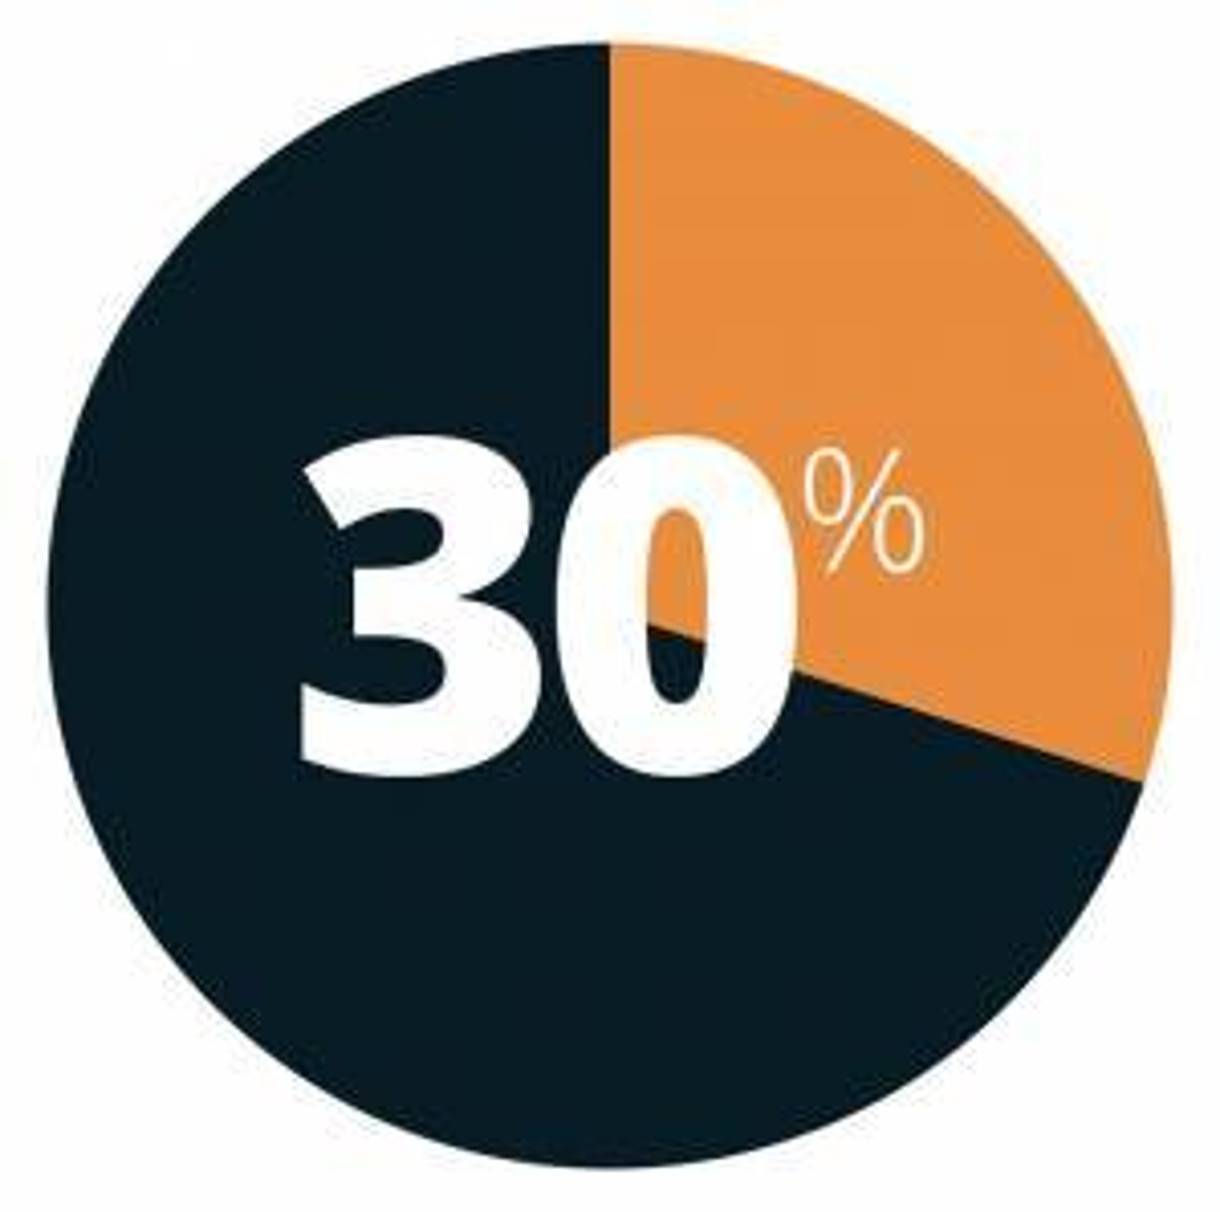 Pie chart showing 30%